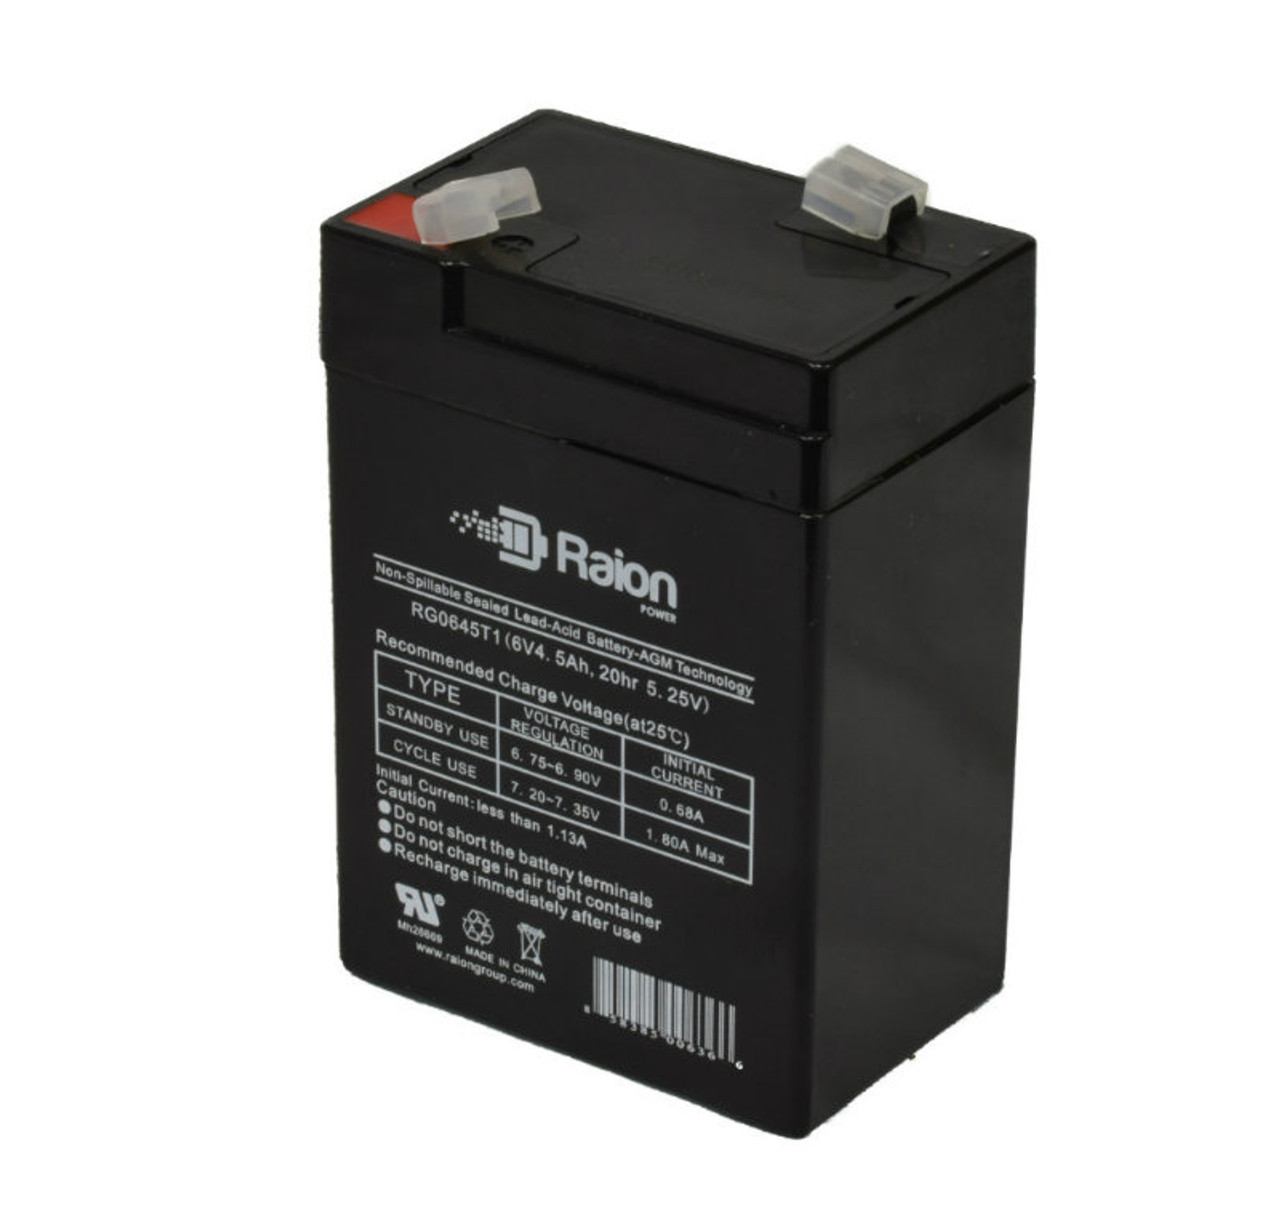 Raion Power RG0645T1 6V 4.5Ah Replacement Battery Cartridge for Delta DT 606